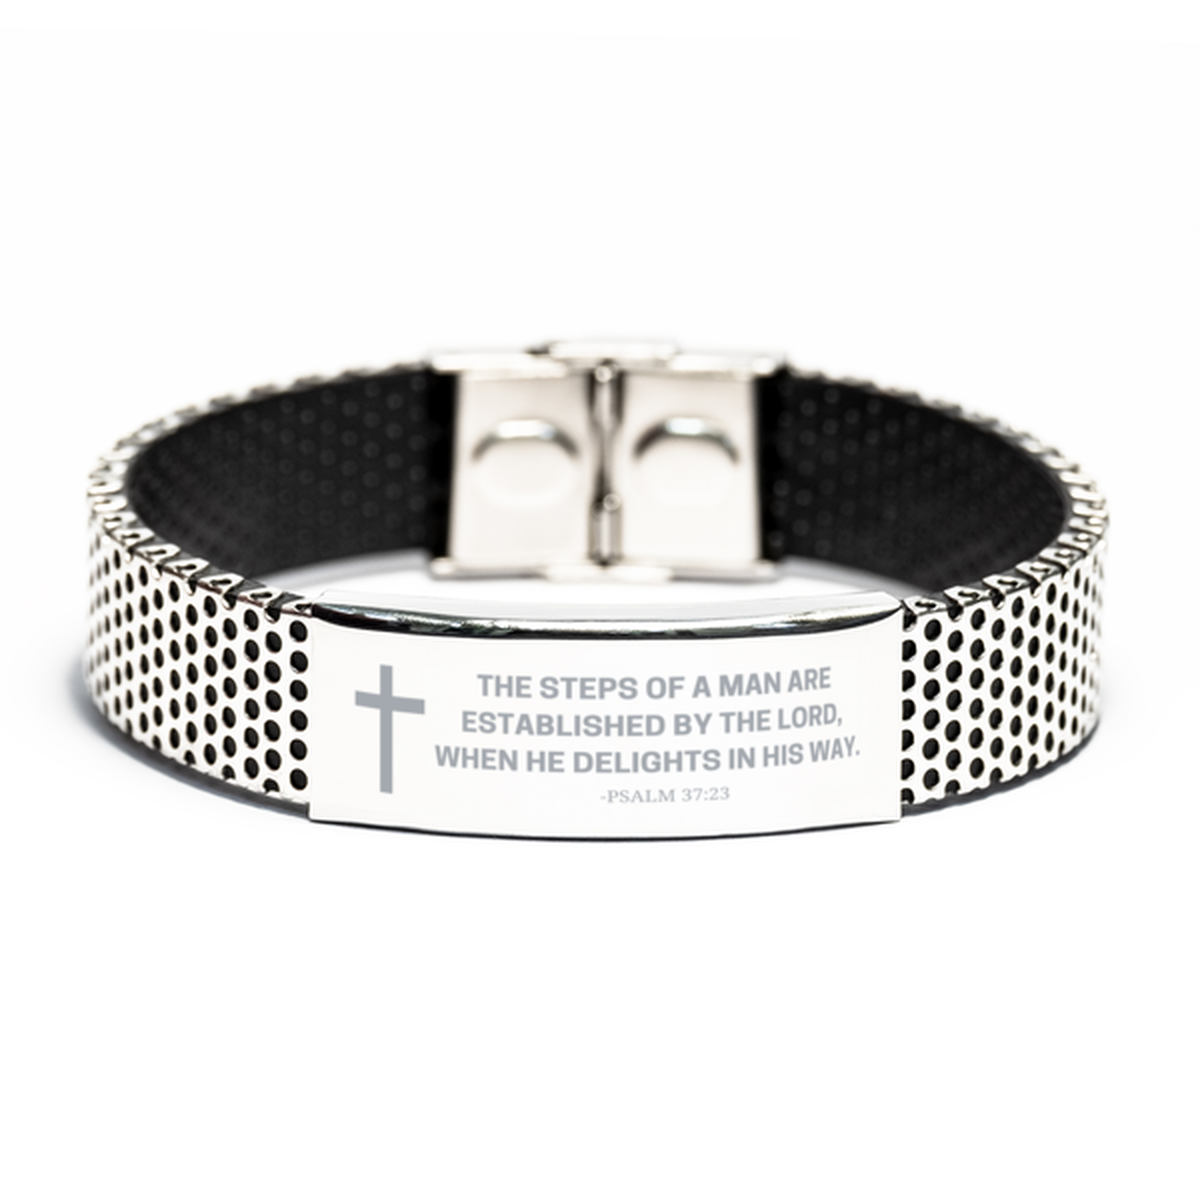 Baptism Gifts For Teenage Boys Girls, Christian Bible Verse Stainless Steel Bracelet, The steps of a man are, Catholic Confirmation Gifts for Son, Godson, Grandson, Nephew